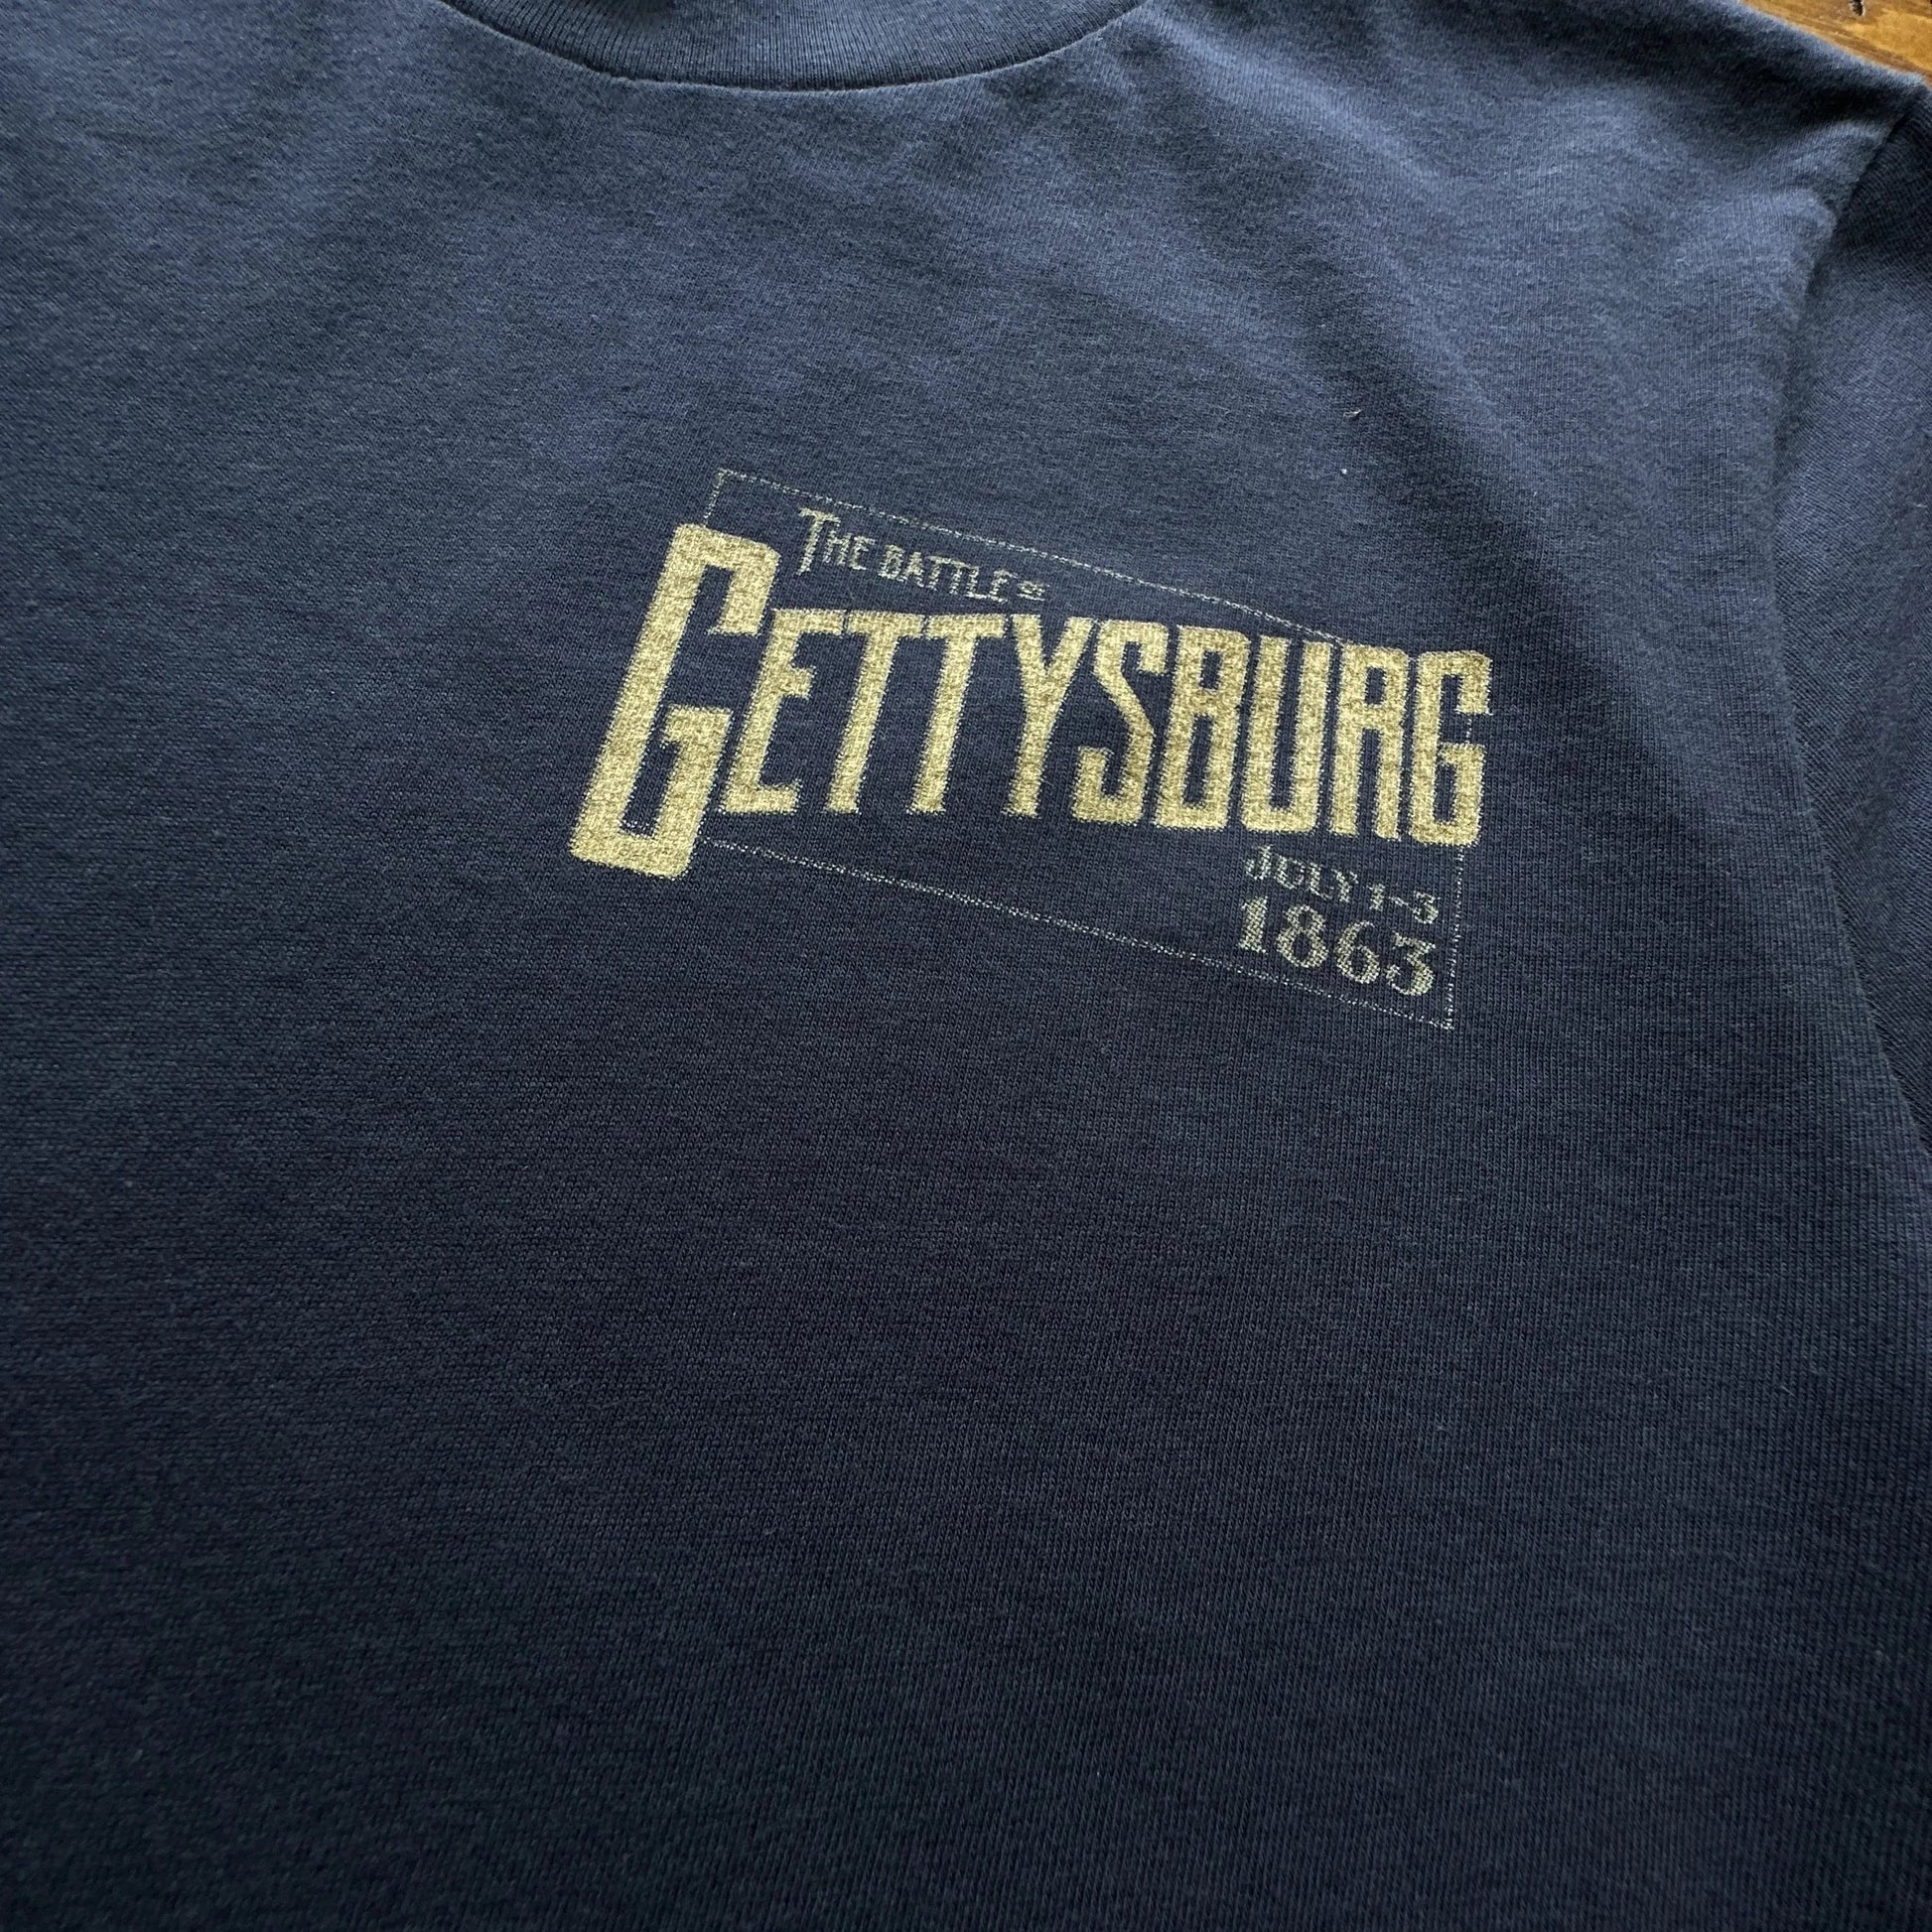 Close-up of front of "The Battle of Gettysburg" Long-sleeved shirt from The History List store